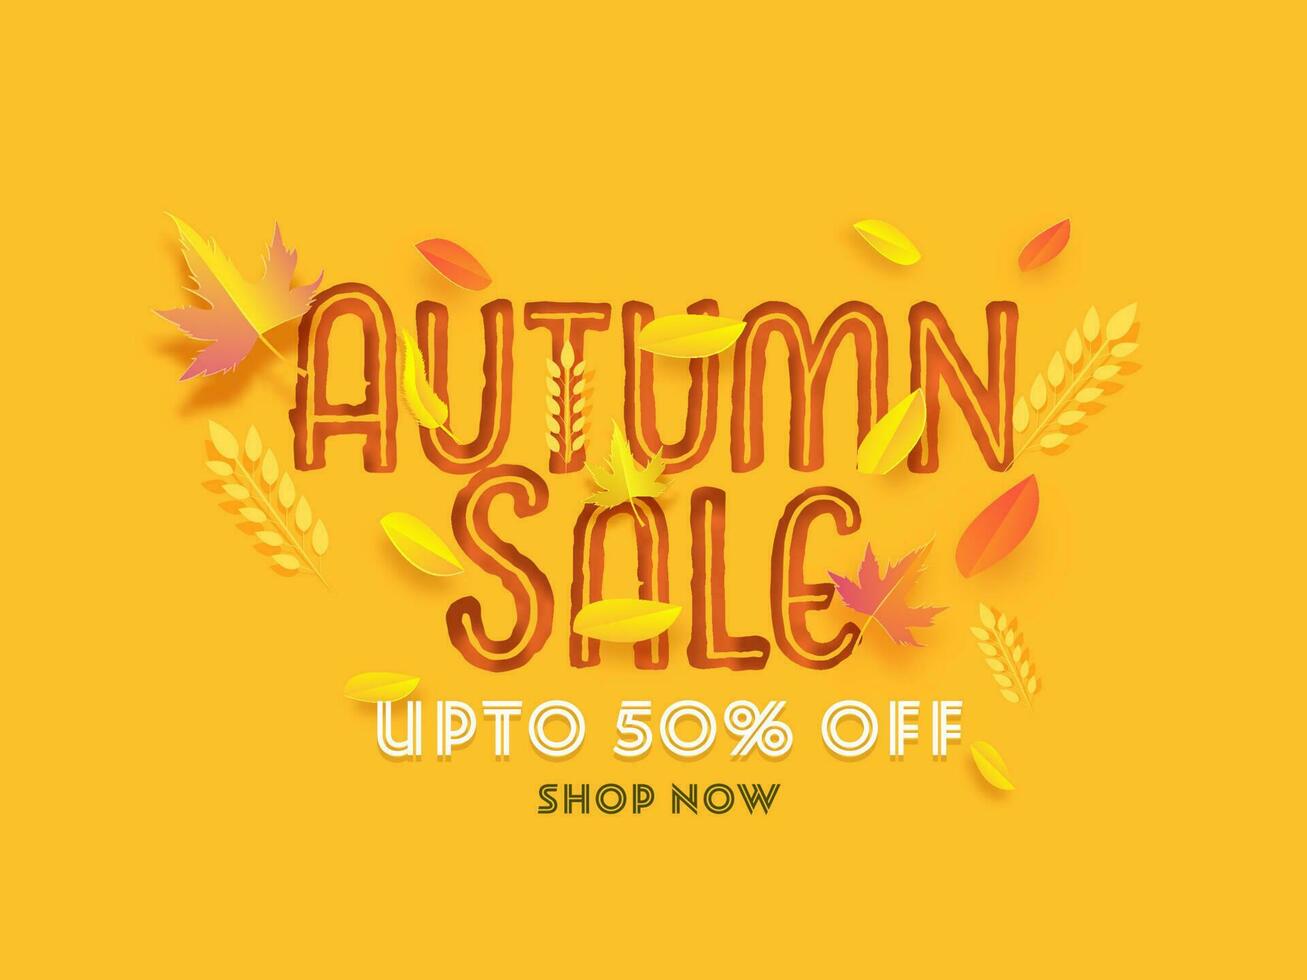 Creative Autumn Sale Text Decorated With Paper Leaves On Orange Background Can Be Used As Poster Design. vector